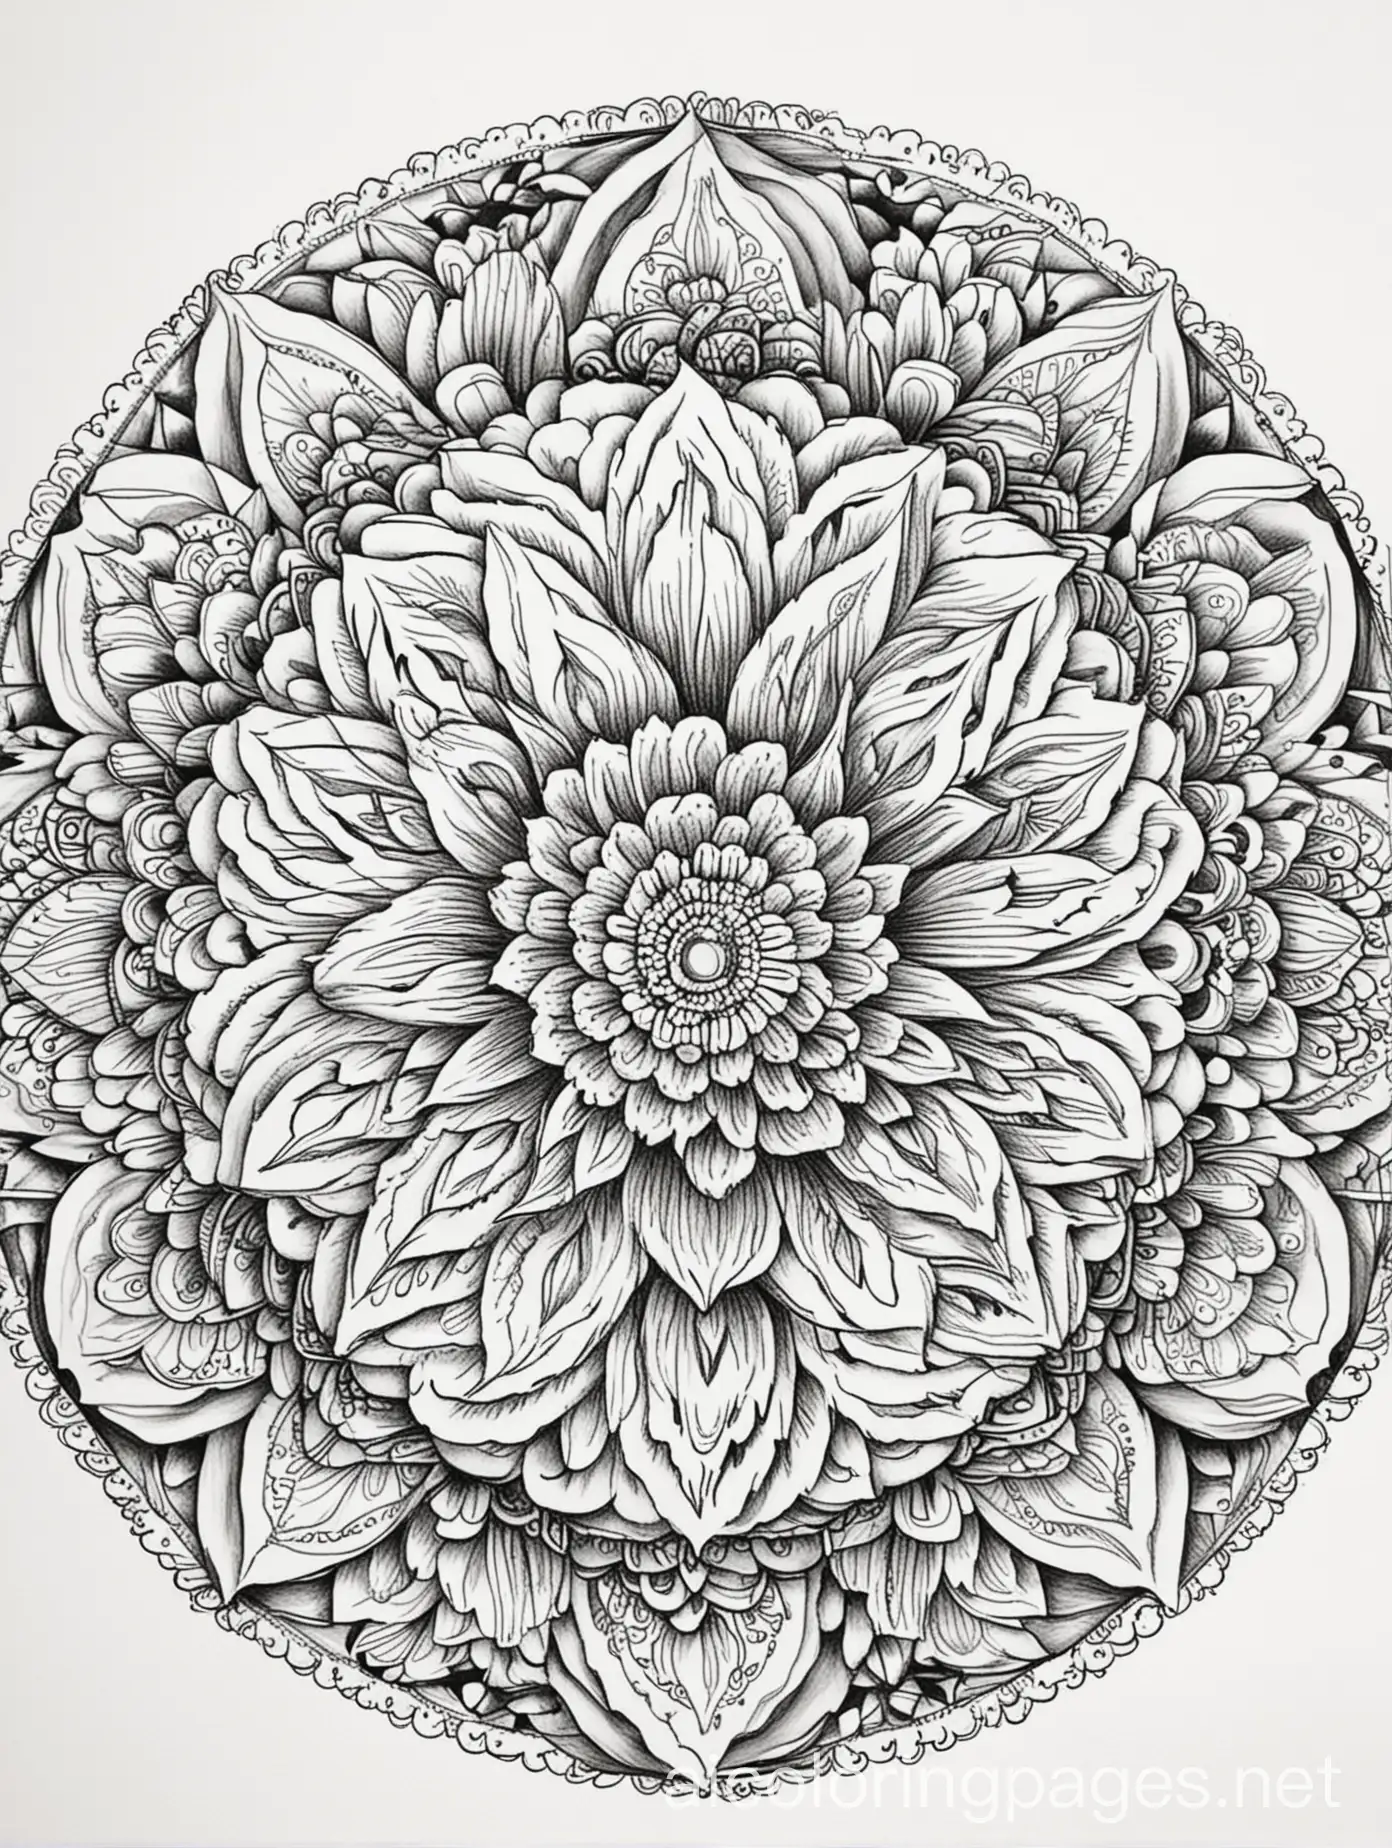 mandala, peaceful mind, coloring mandala flower, Coloring Page, black and white, line art, white background, Simplicity, Ample White Space